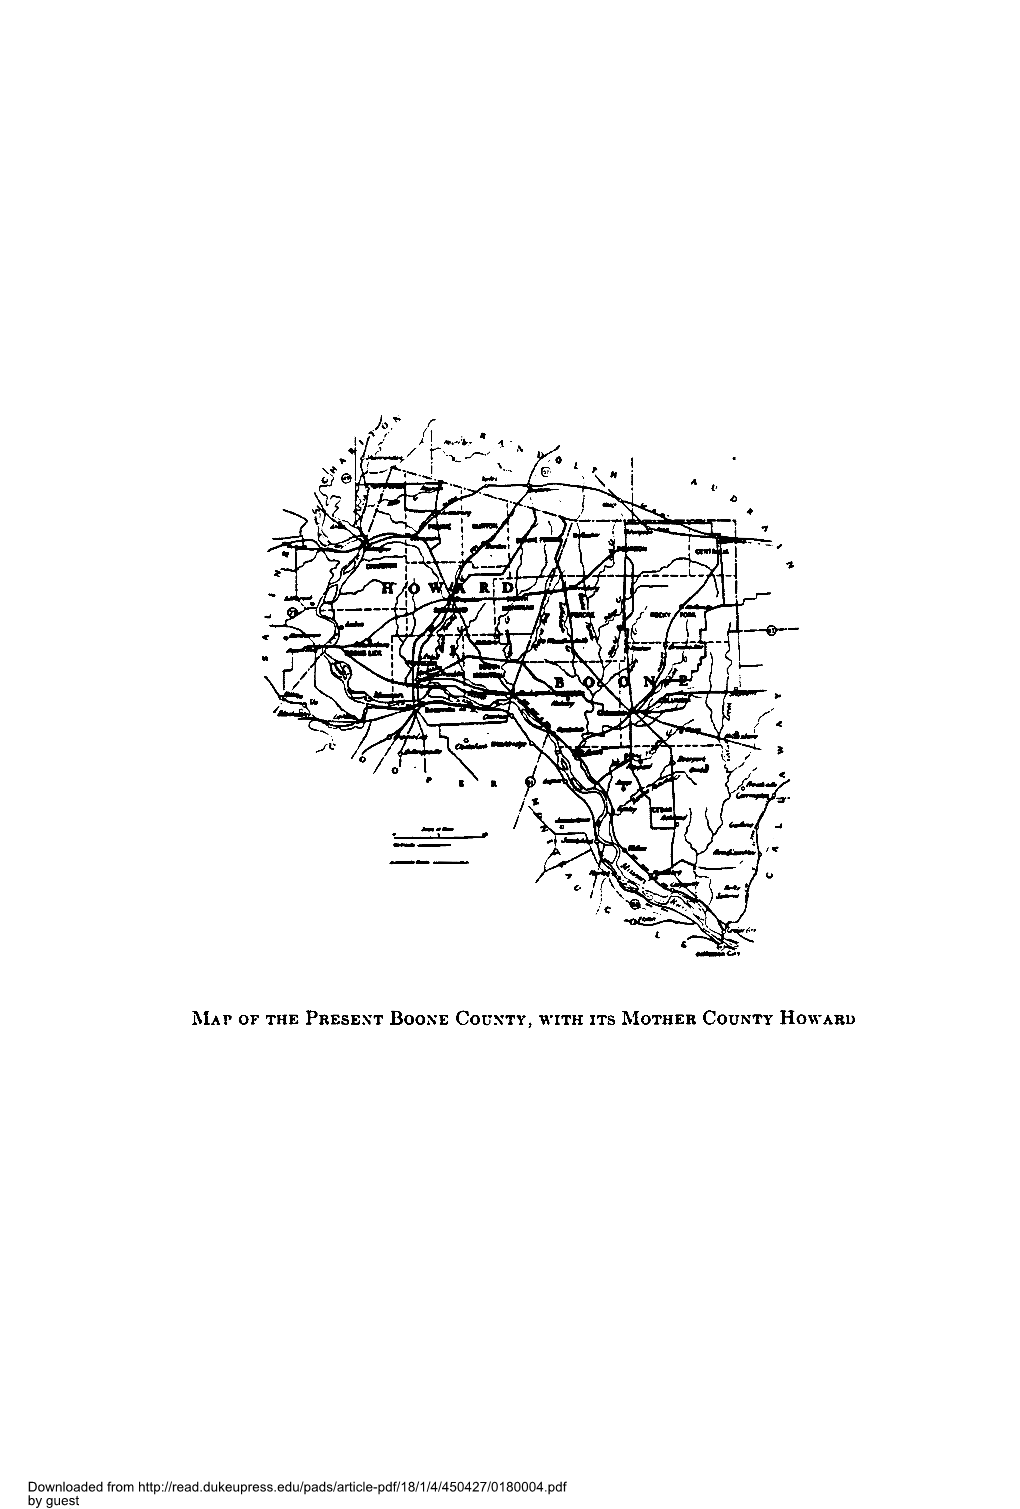 The Place Names of Boone County, Missouri